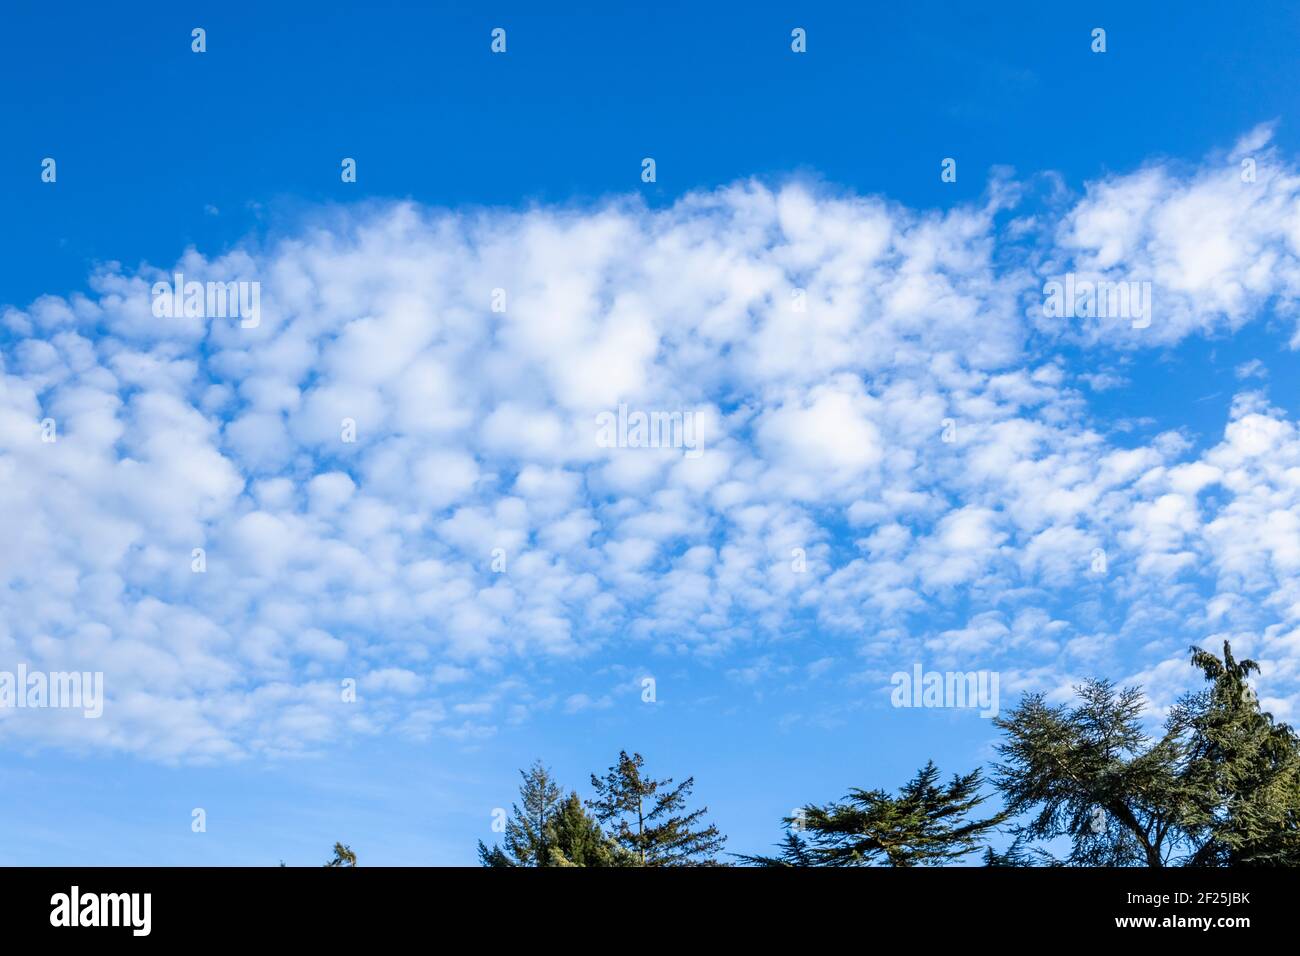 Typical mackerel sky over treetops: small high altitude white fluffy clouds in a blue sky in south-east England, an indicator of good weather Stock Photo